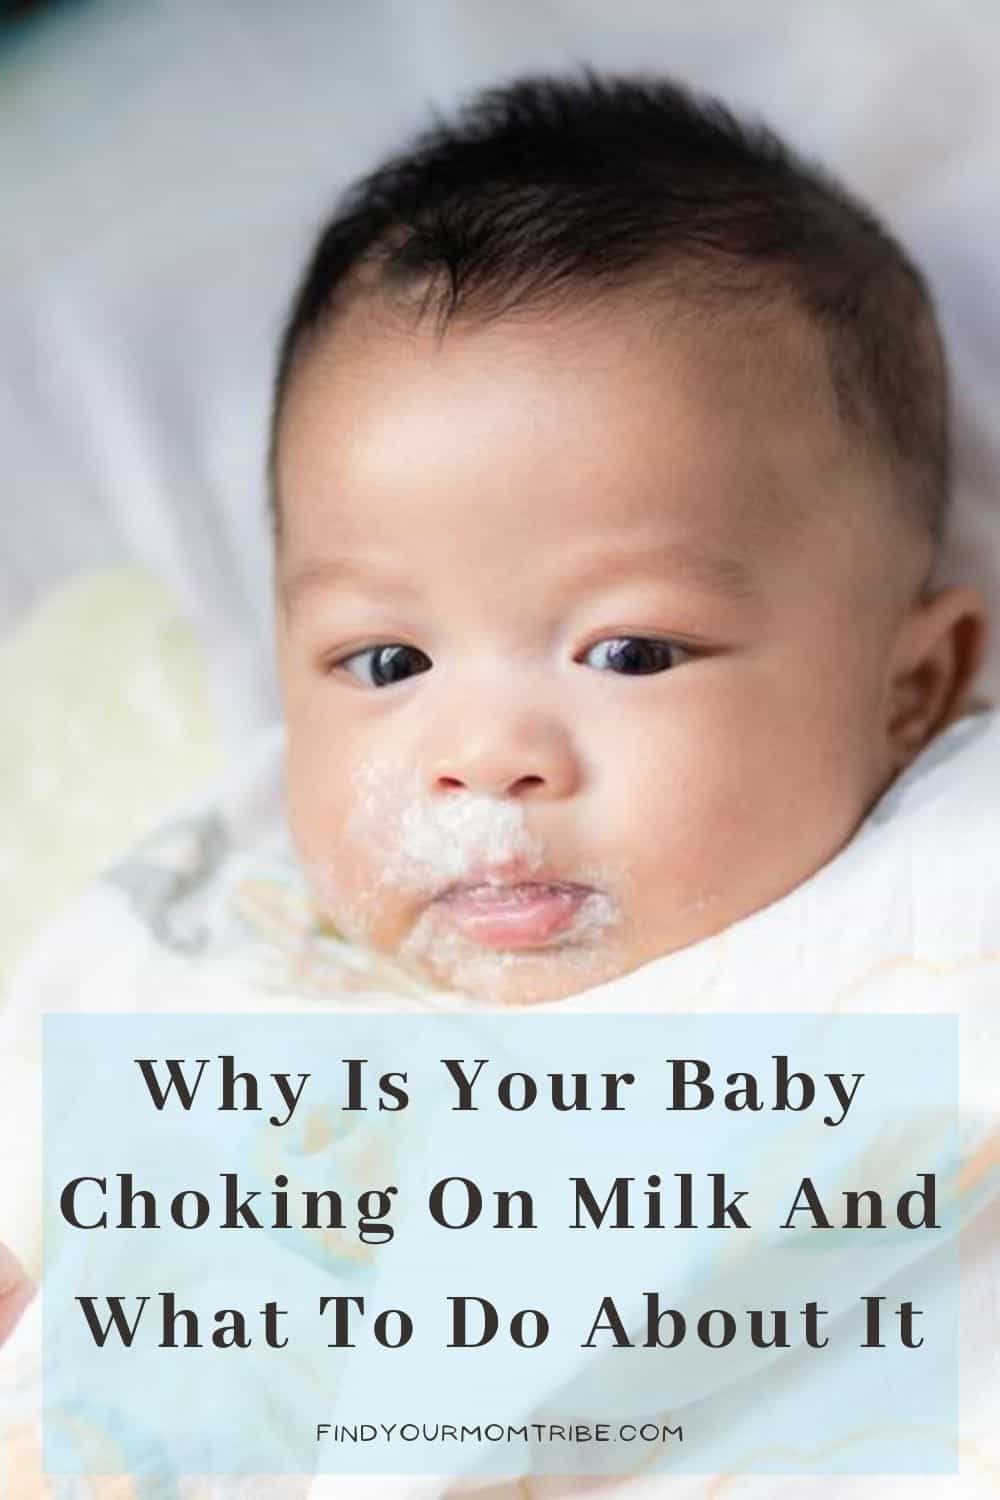 Why Is Your Baby Choking On Milk And What To Do About It